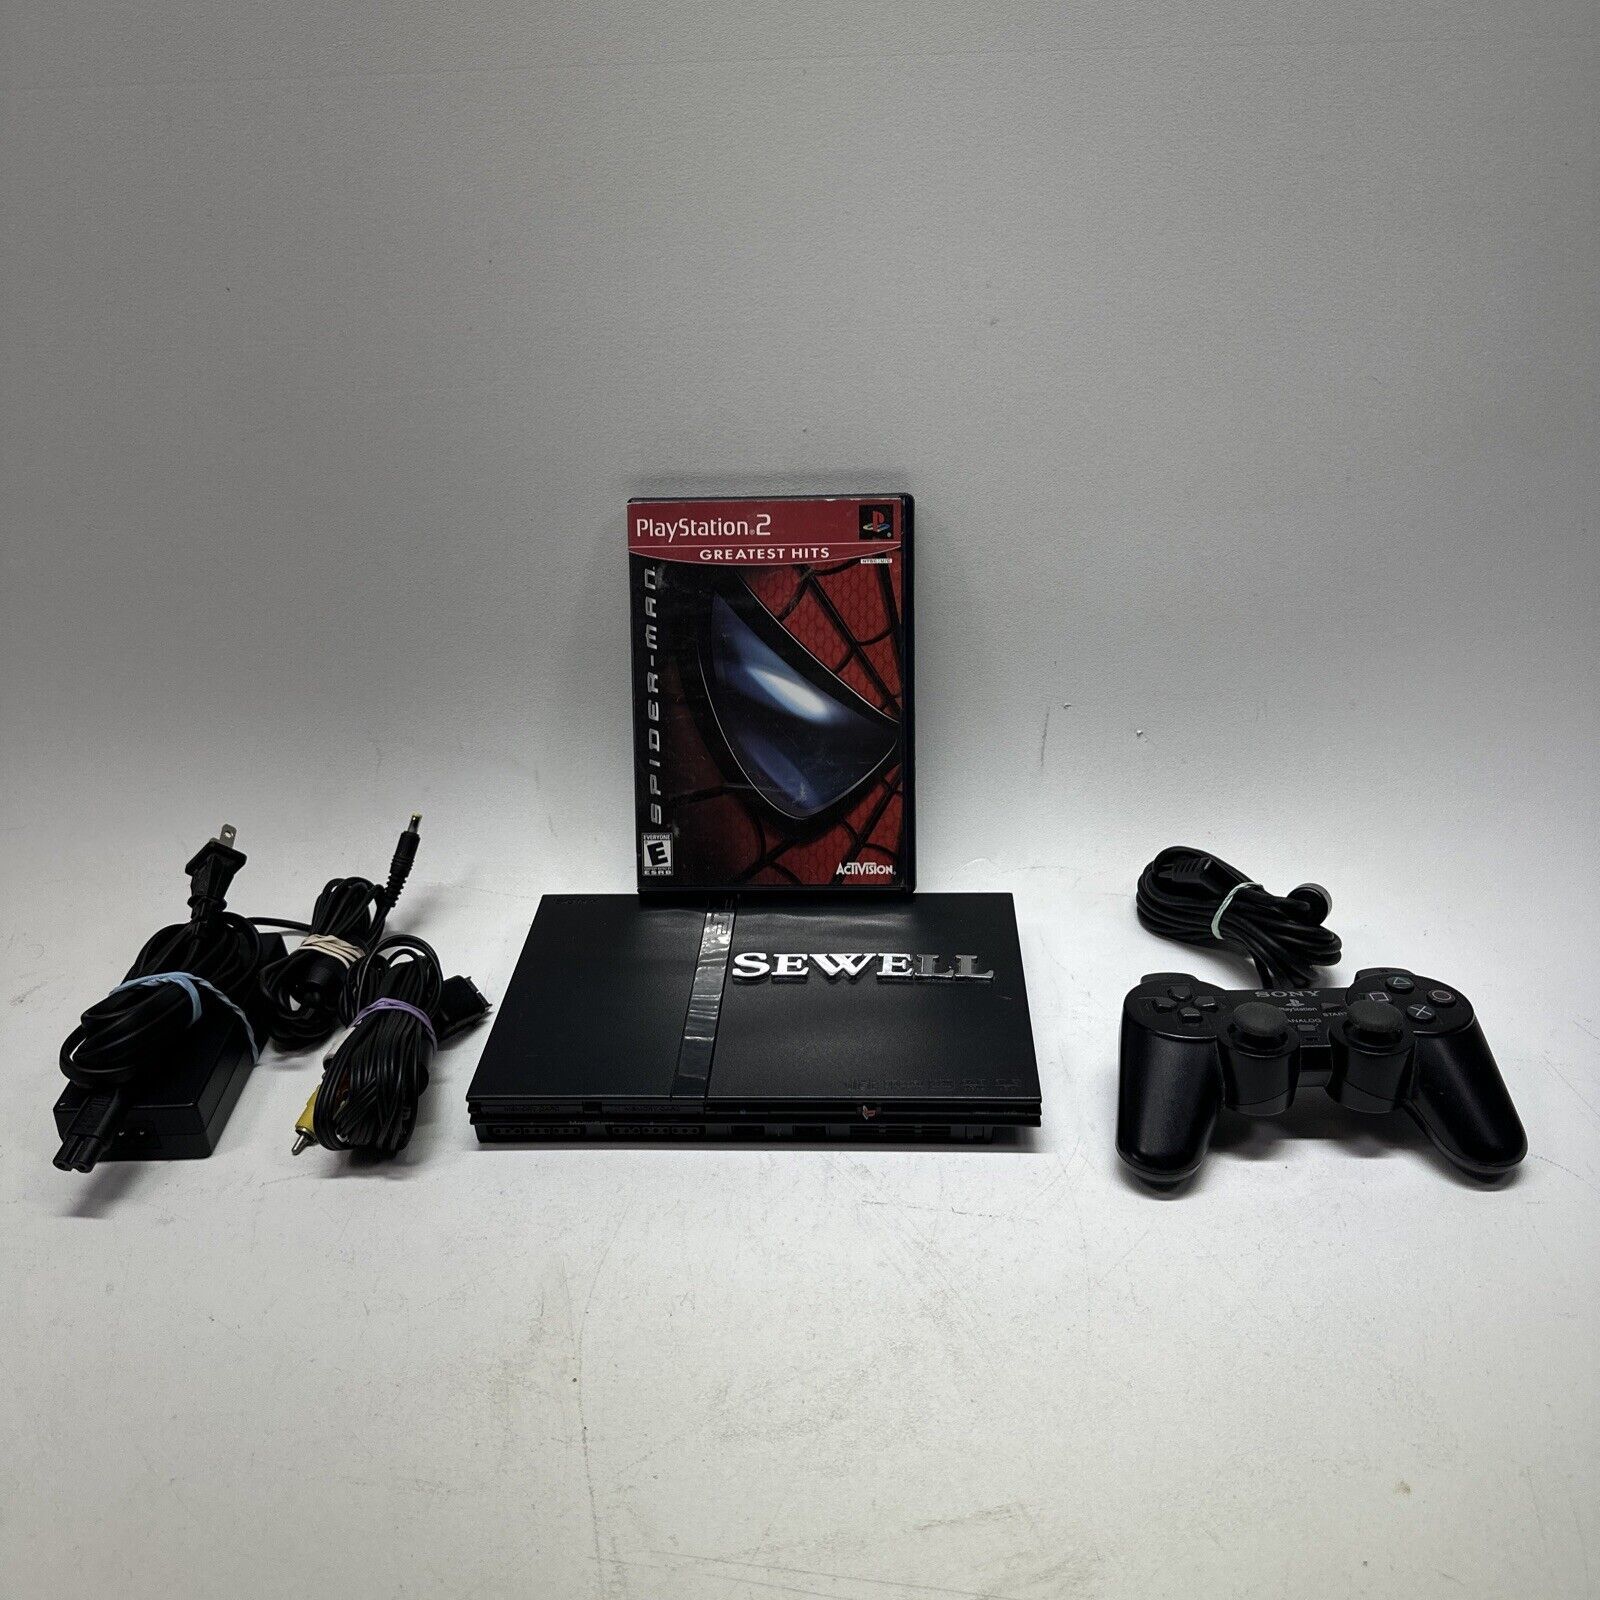 Primary image for OEM Sony PS2 PlayStation 2 Slim Black Console Bundle SCPH-75001 Slimline System